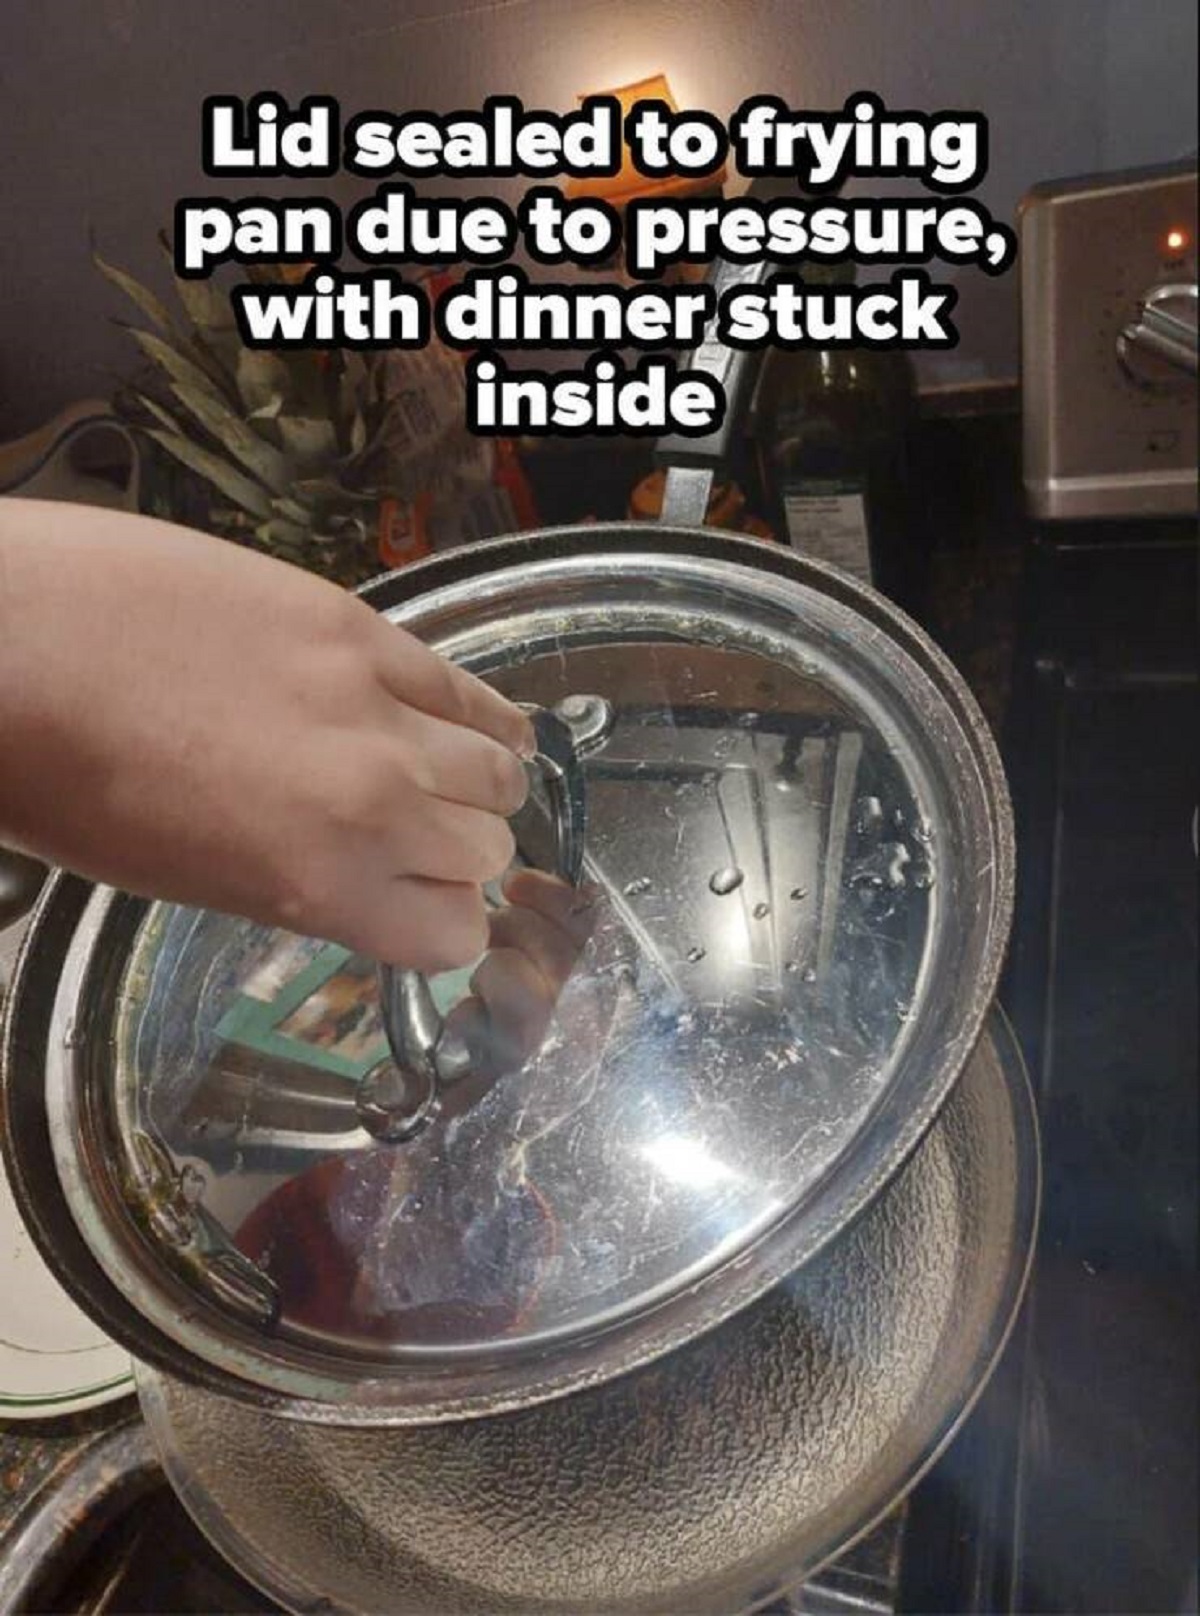 lid stuck on pan - Lid sealed to frying pan due to pressure, with dinner stuck inside